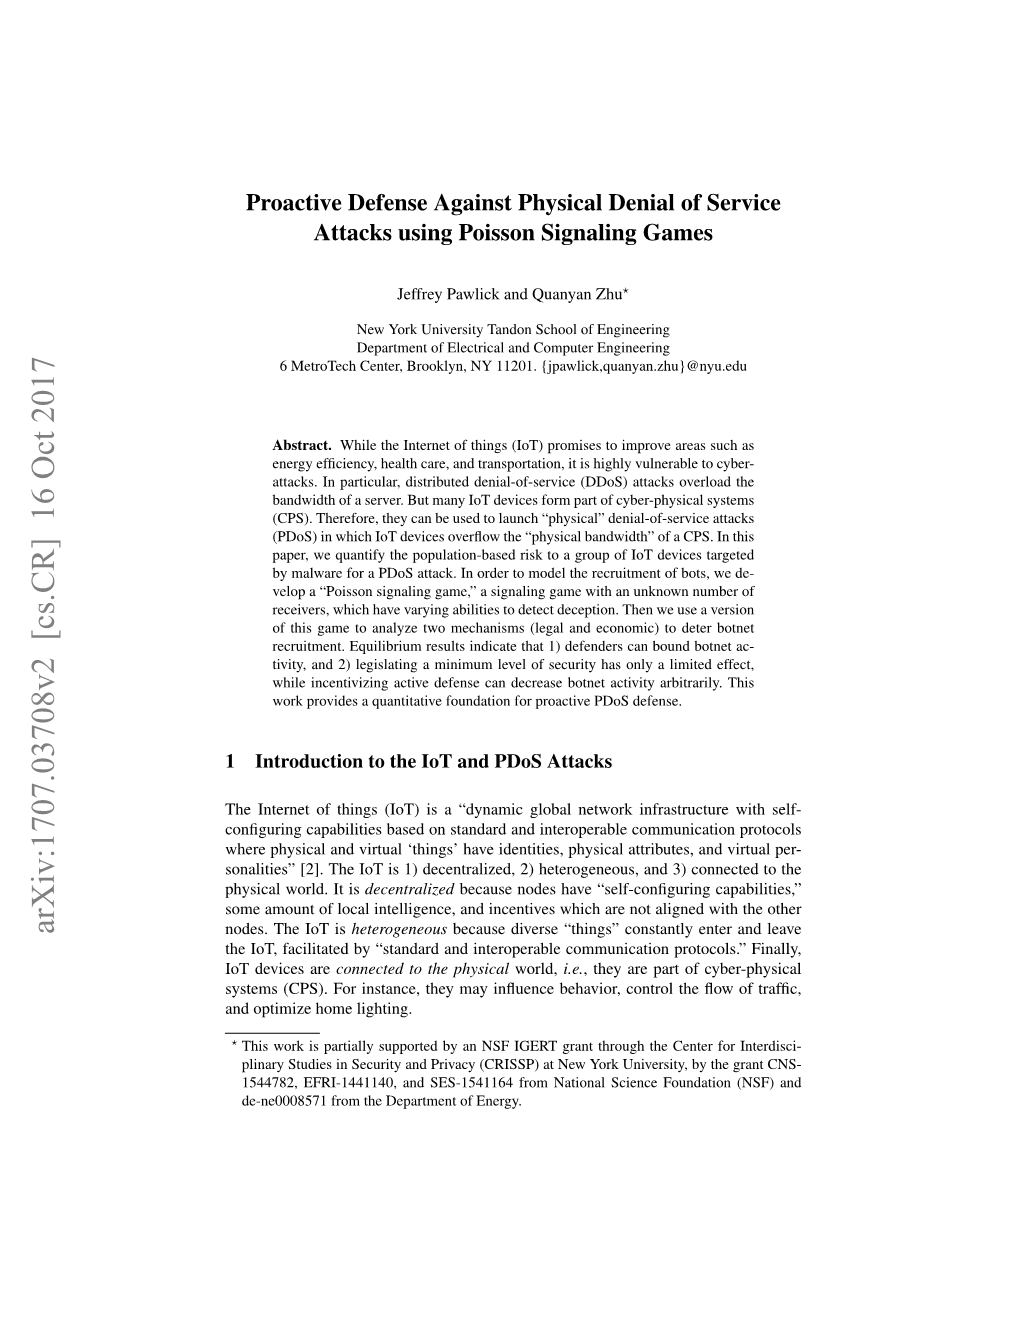 Proactive Defense Against Physical Denial of Service Attacks Using Poisson Signaling Games